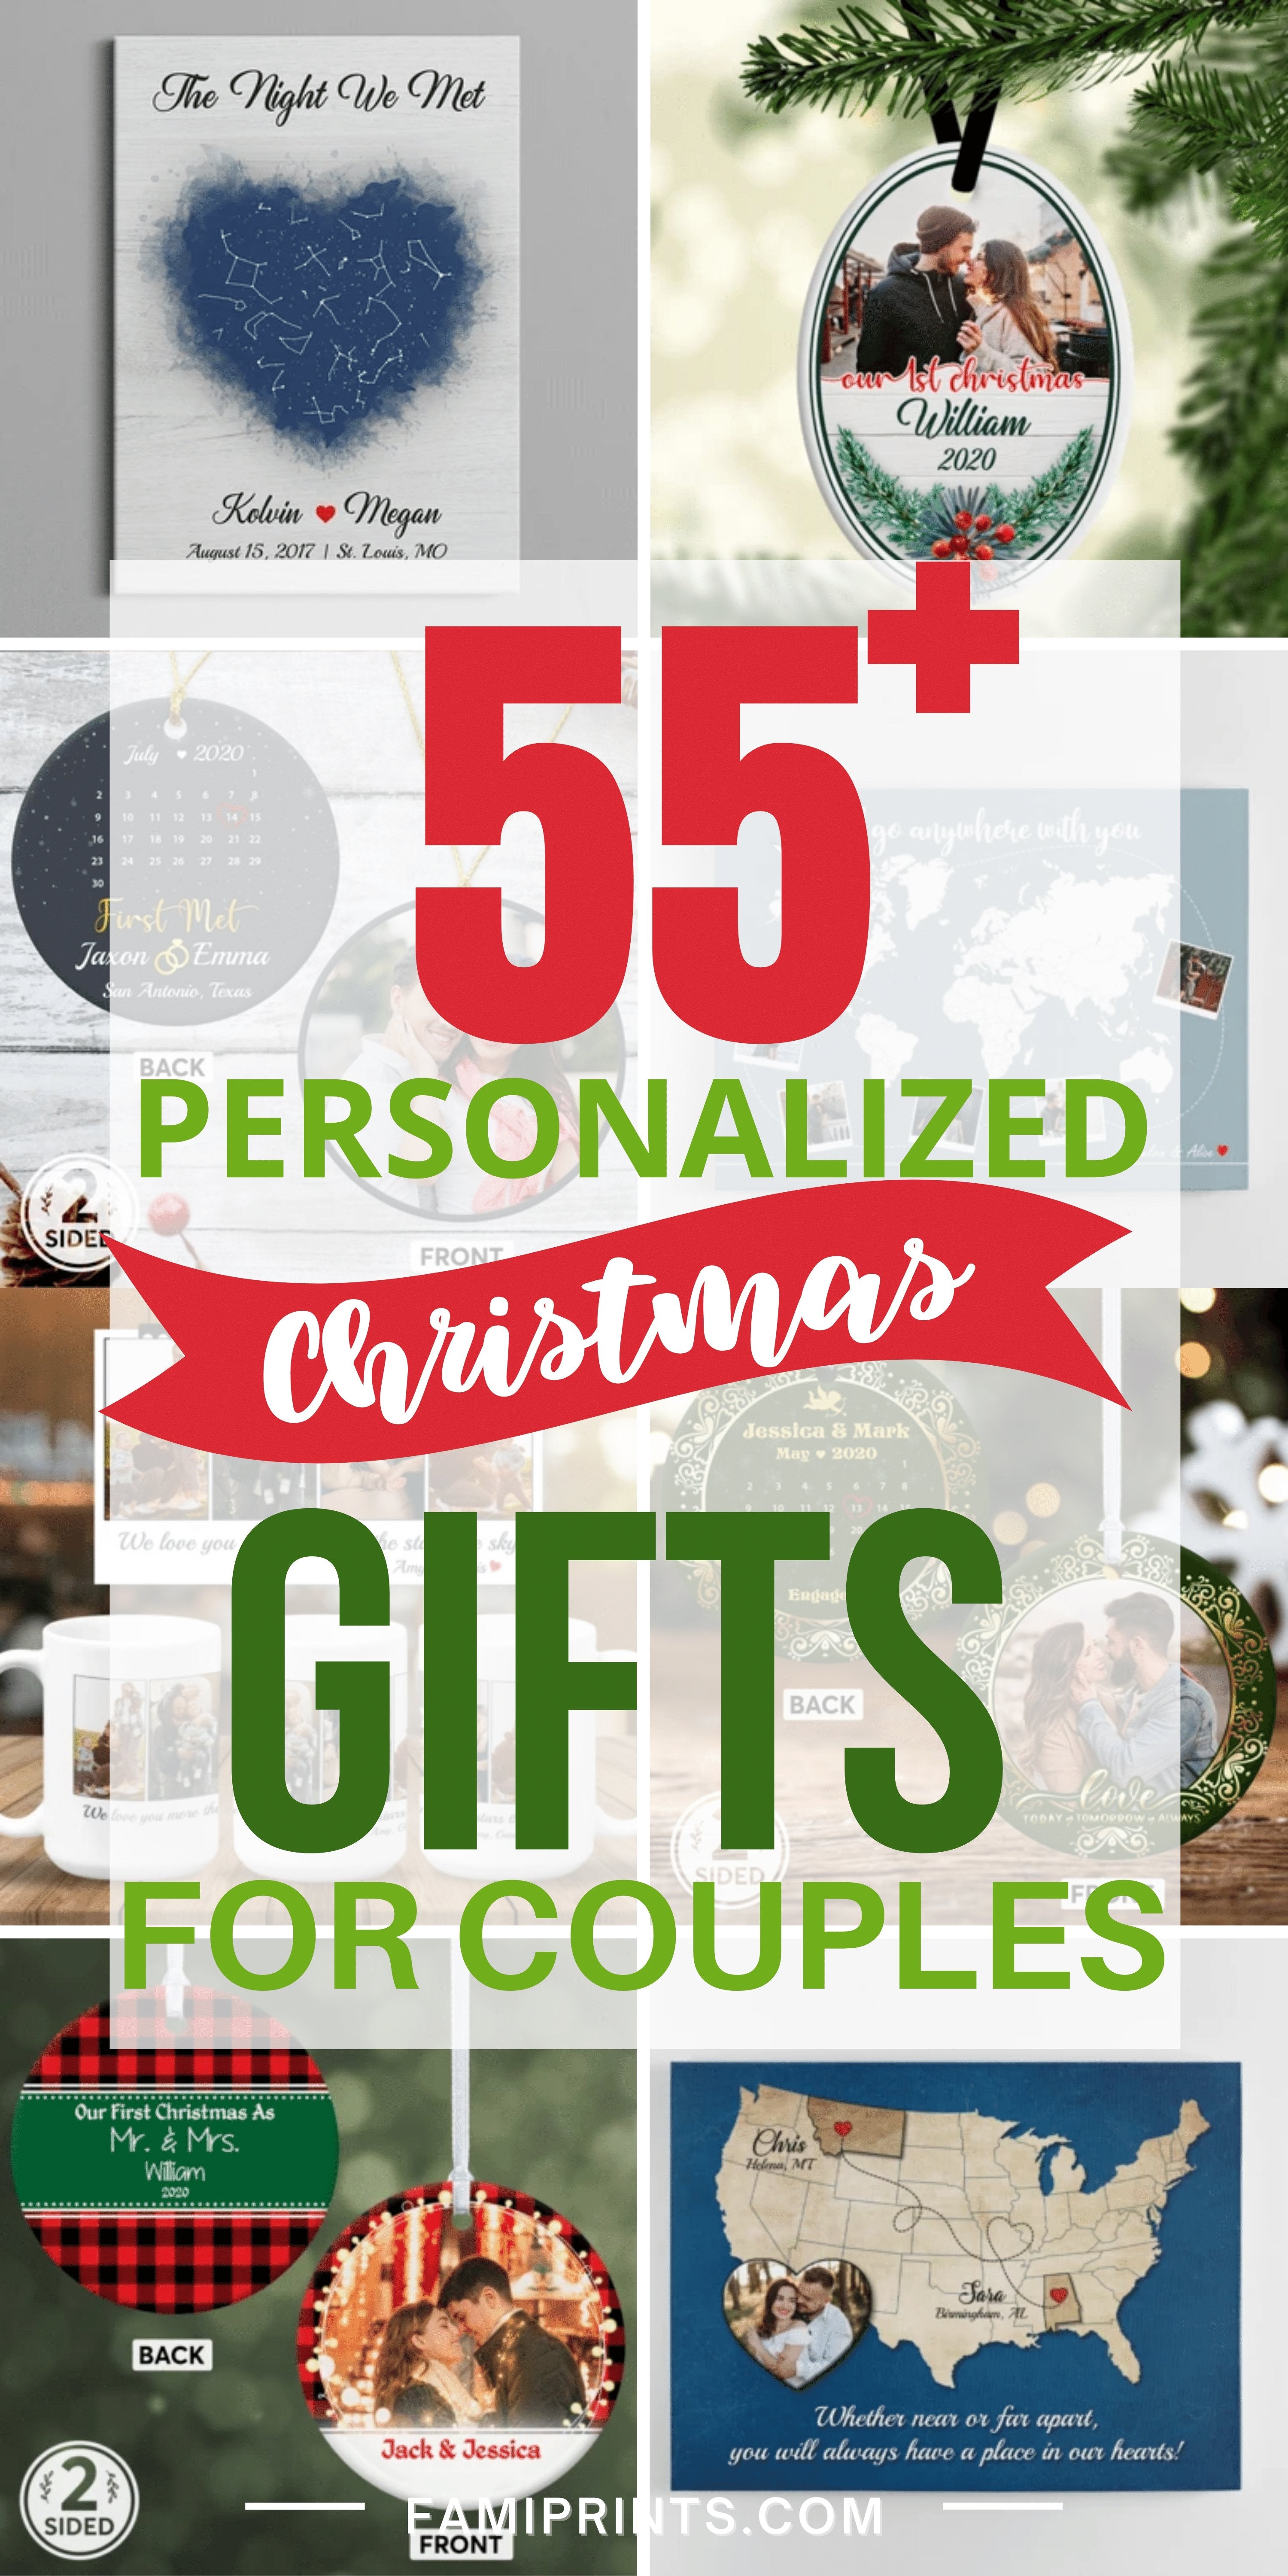 Personalized Christmas Gifts for Couples | FamiPrints | Trending Personalized Family Gifts